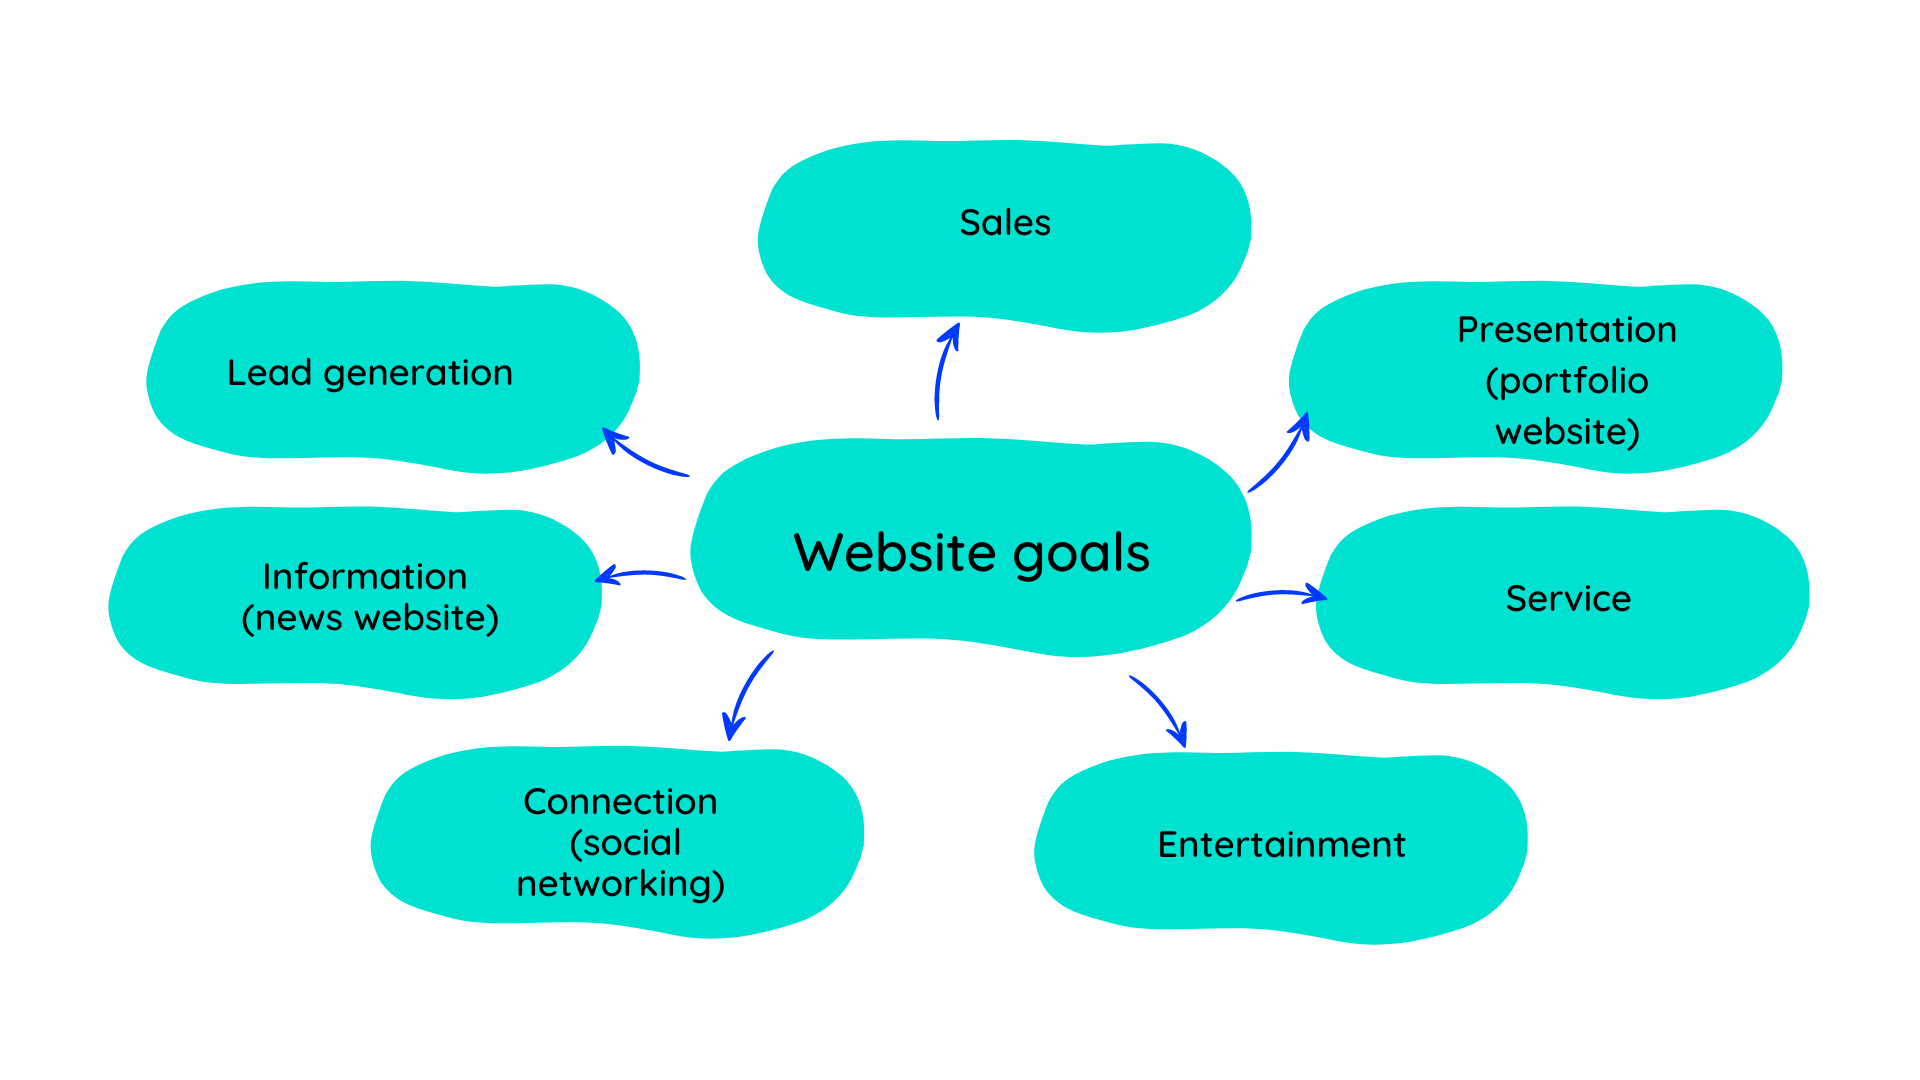 A complex website can have various purposes - lead generation, sales, entertainment, and information